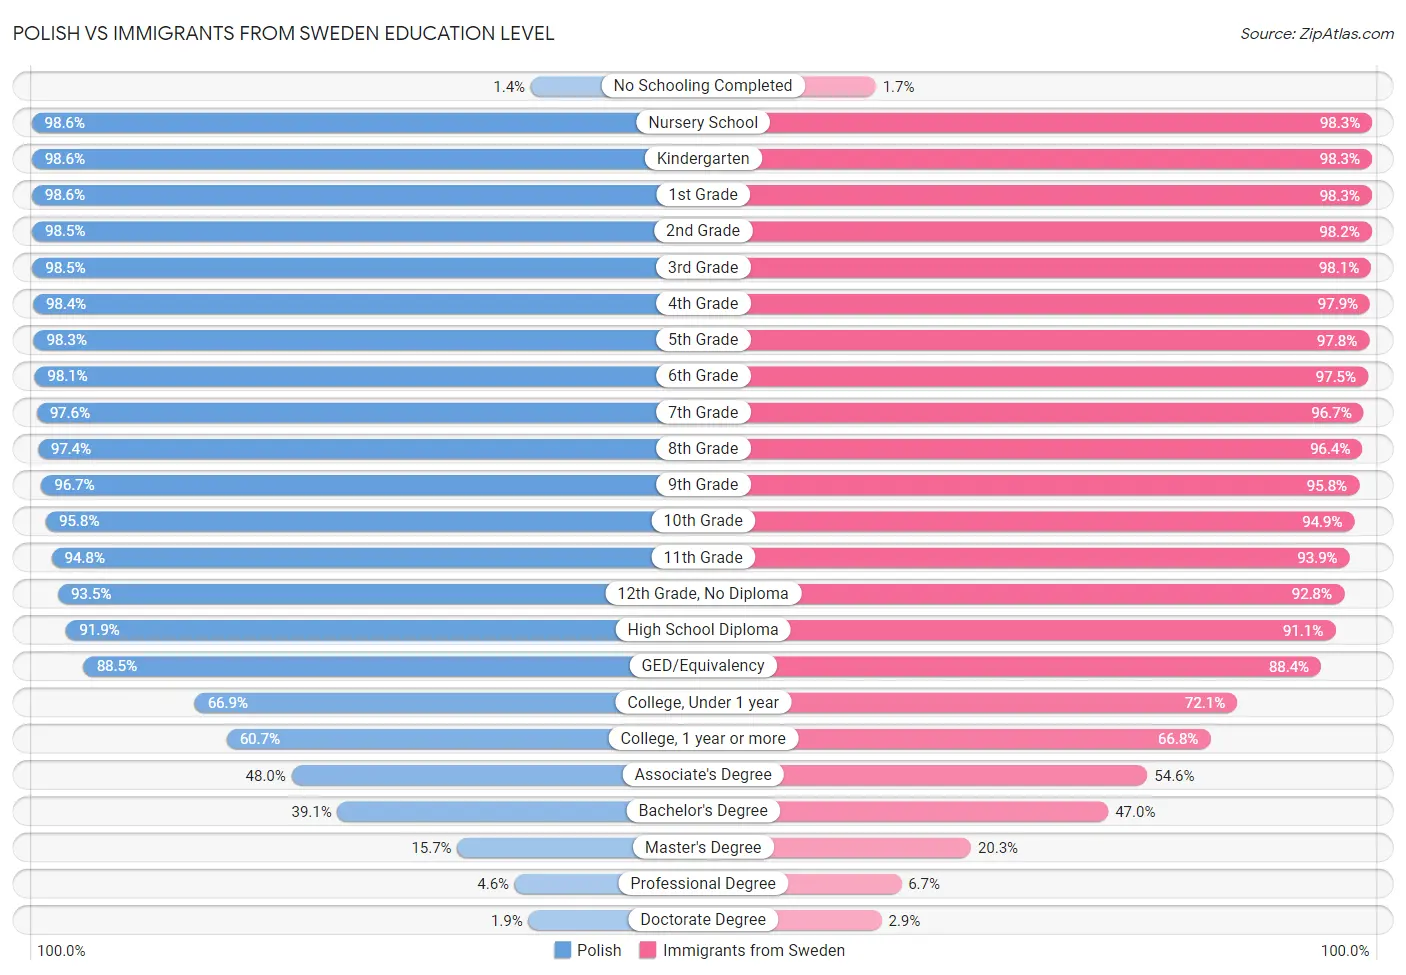 Polish vs Immigrants from Sweden Education Level